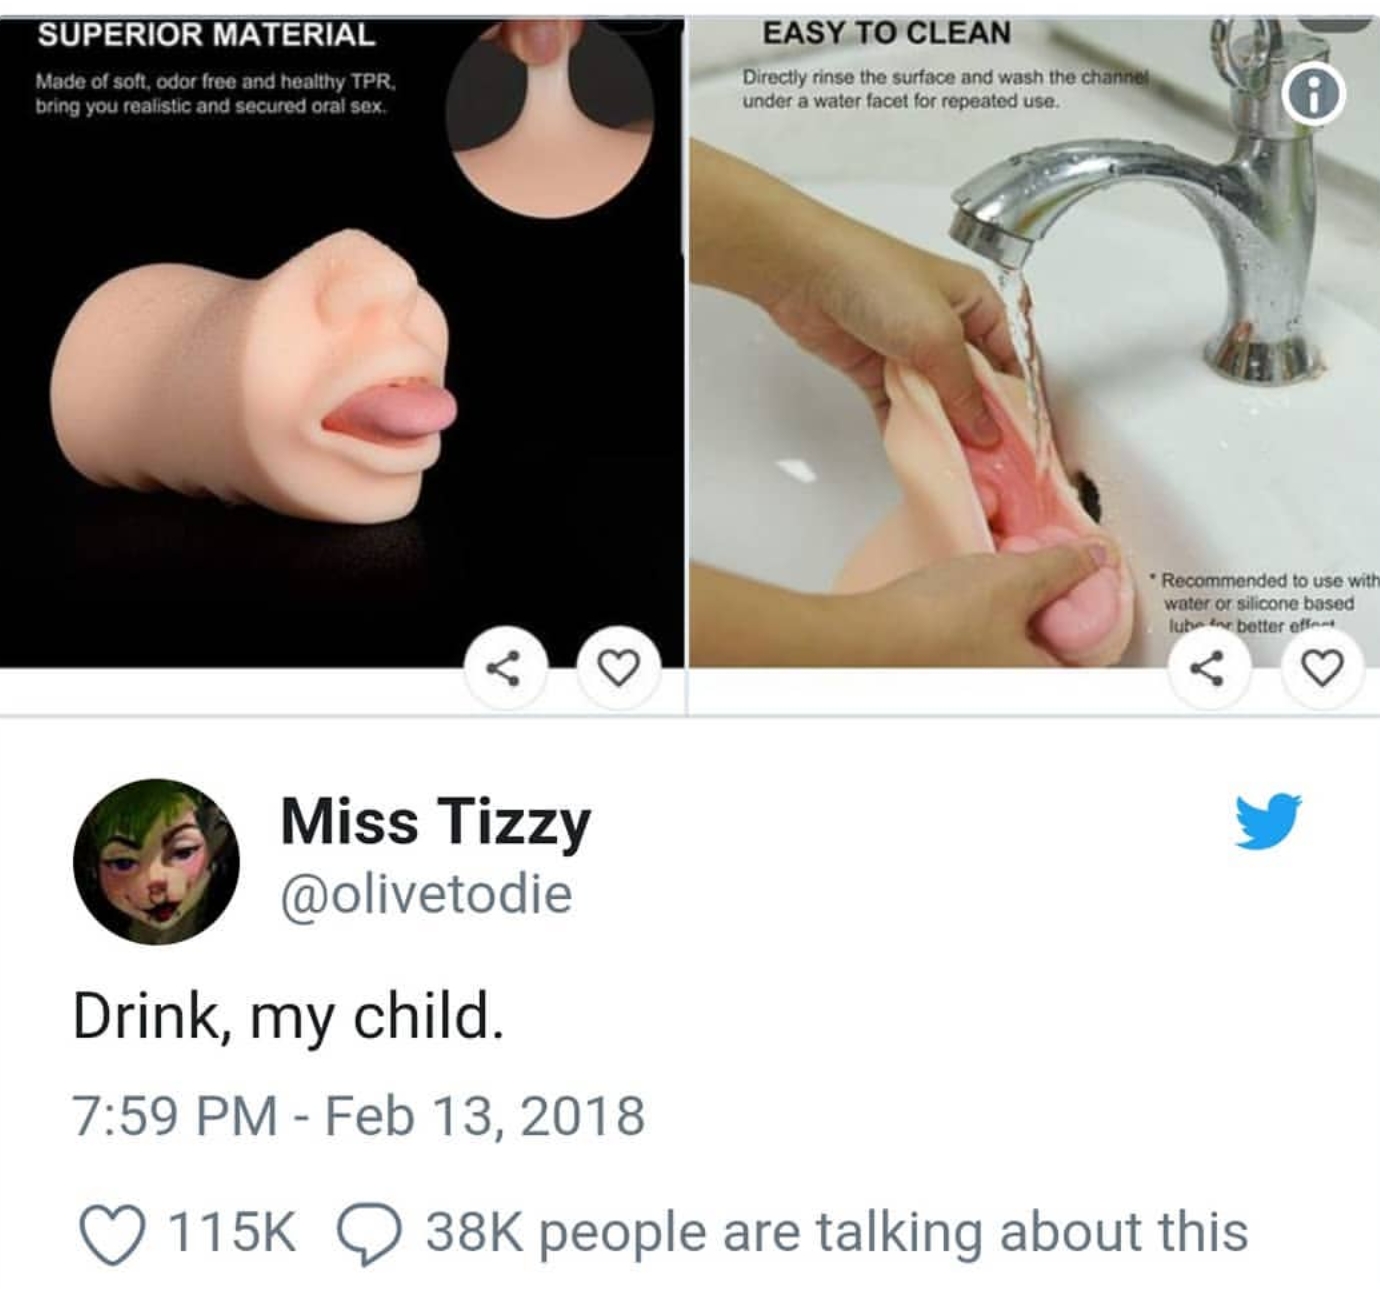 dank meme of device that mimics oral sex and someone points out some of the features that are unsettling about the item